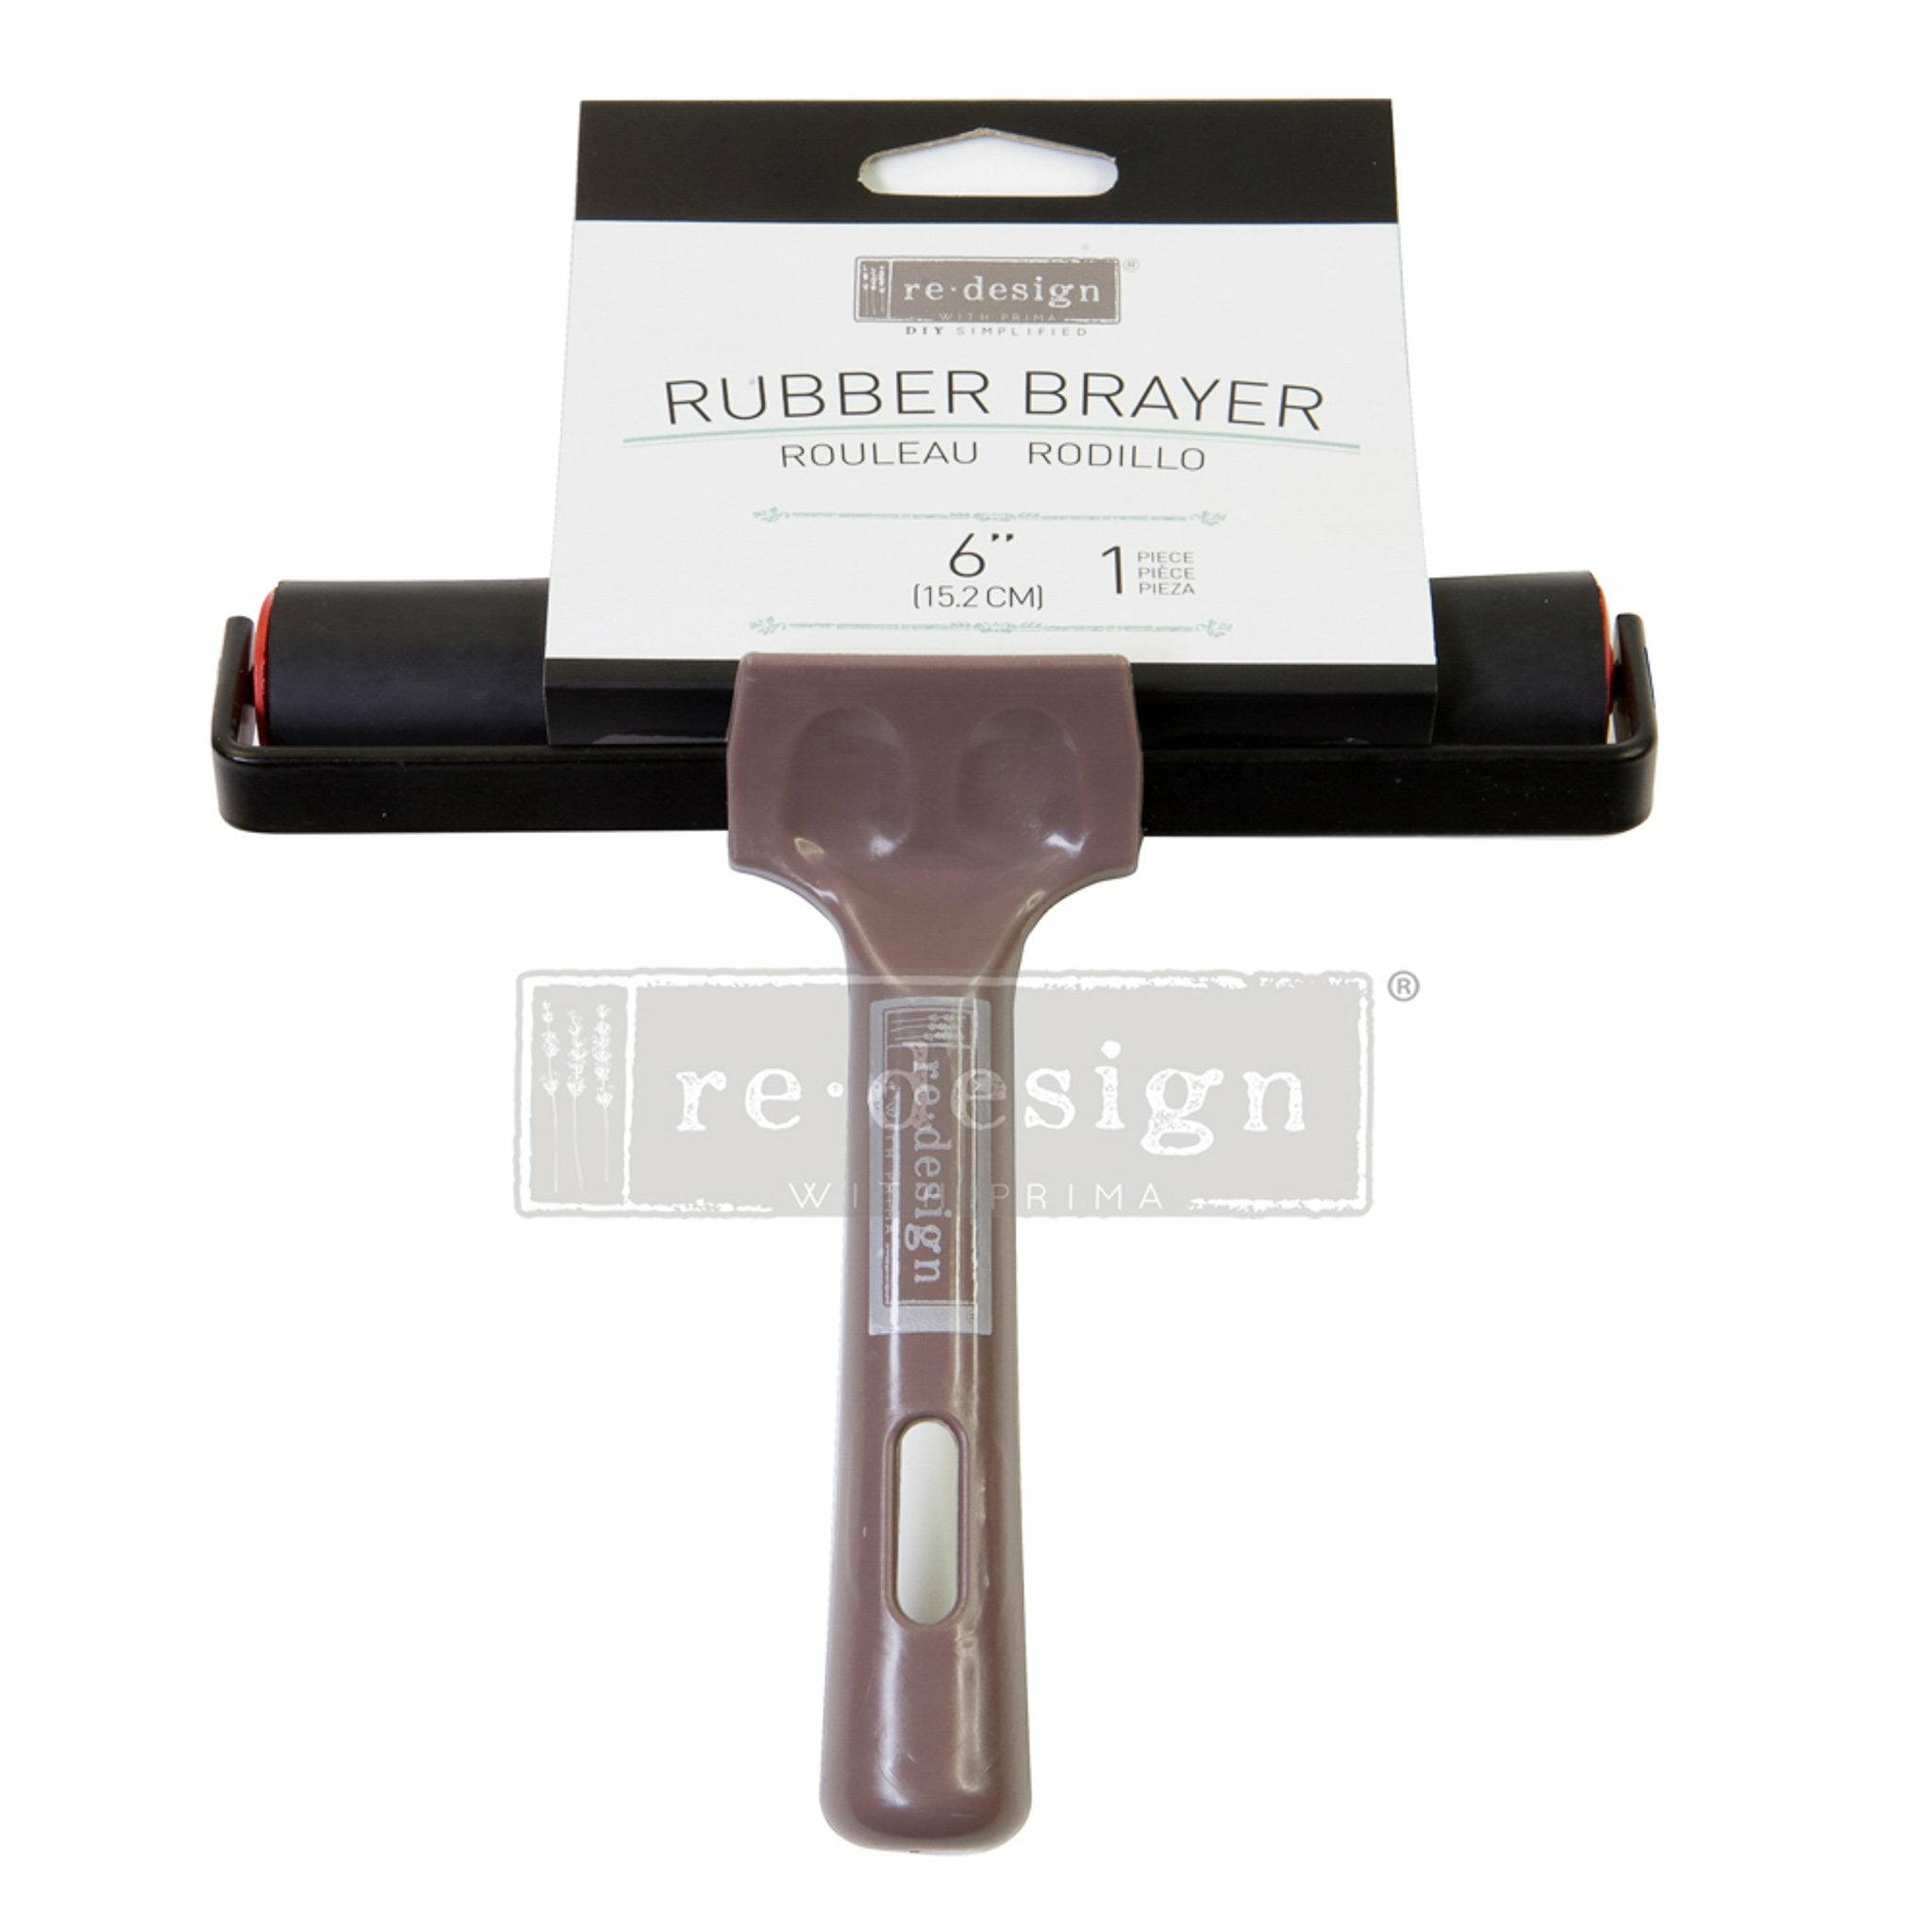 White background with a brown and black rubber brayer and a tag reading: Redesign diy simplified. Rubber Brayer. Rouleau. Rodillo. 6" (152 cm) 1 piece. piece. pieza. A transparent redesign logo is on top.